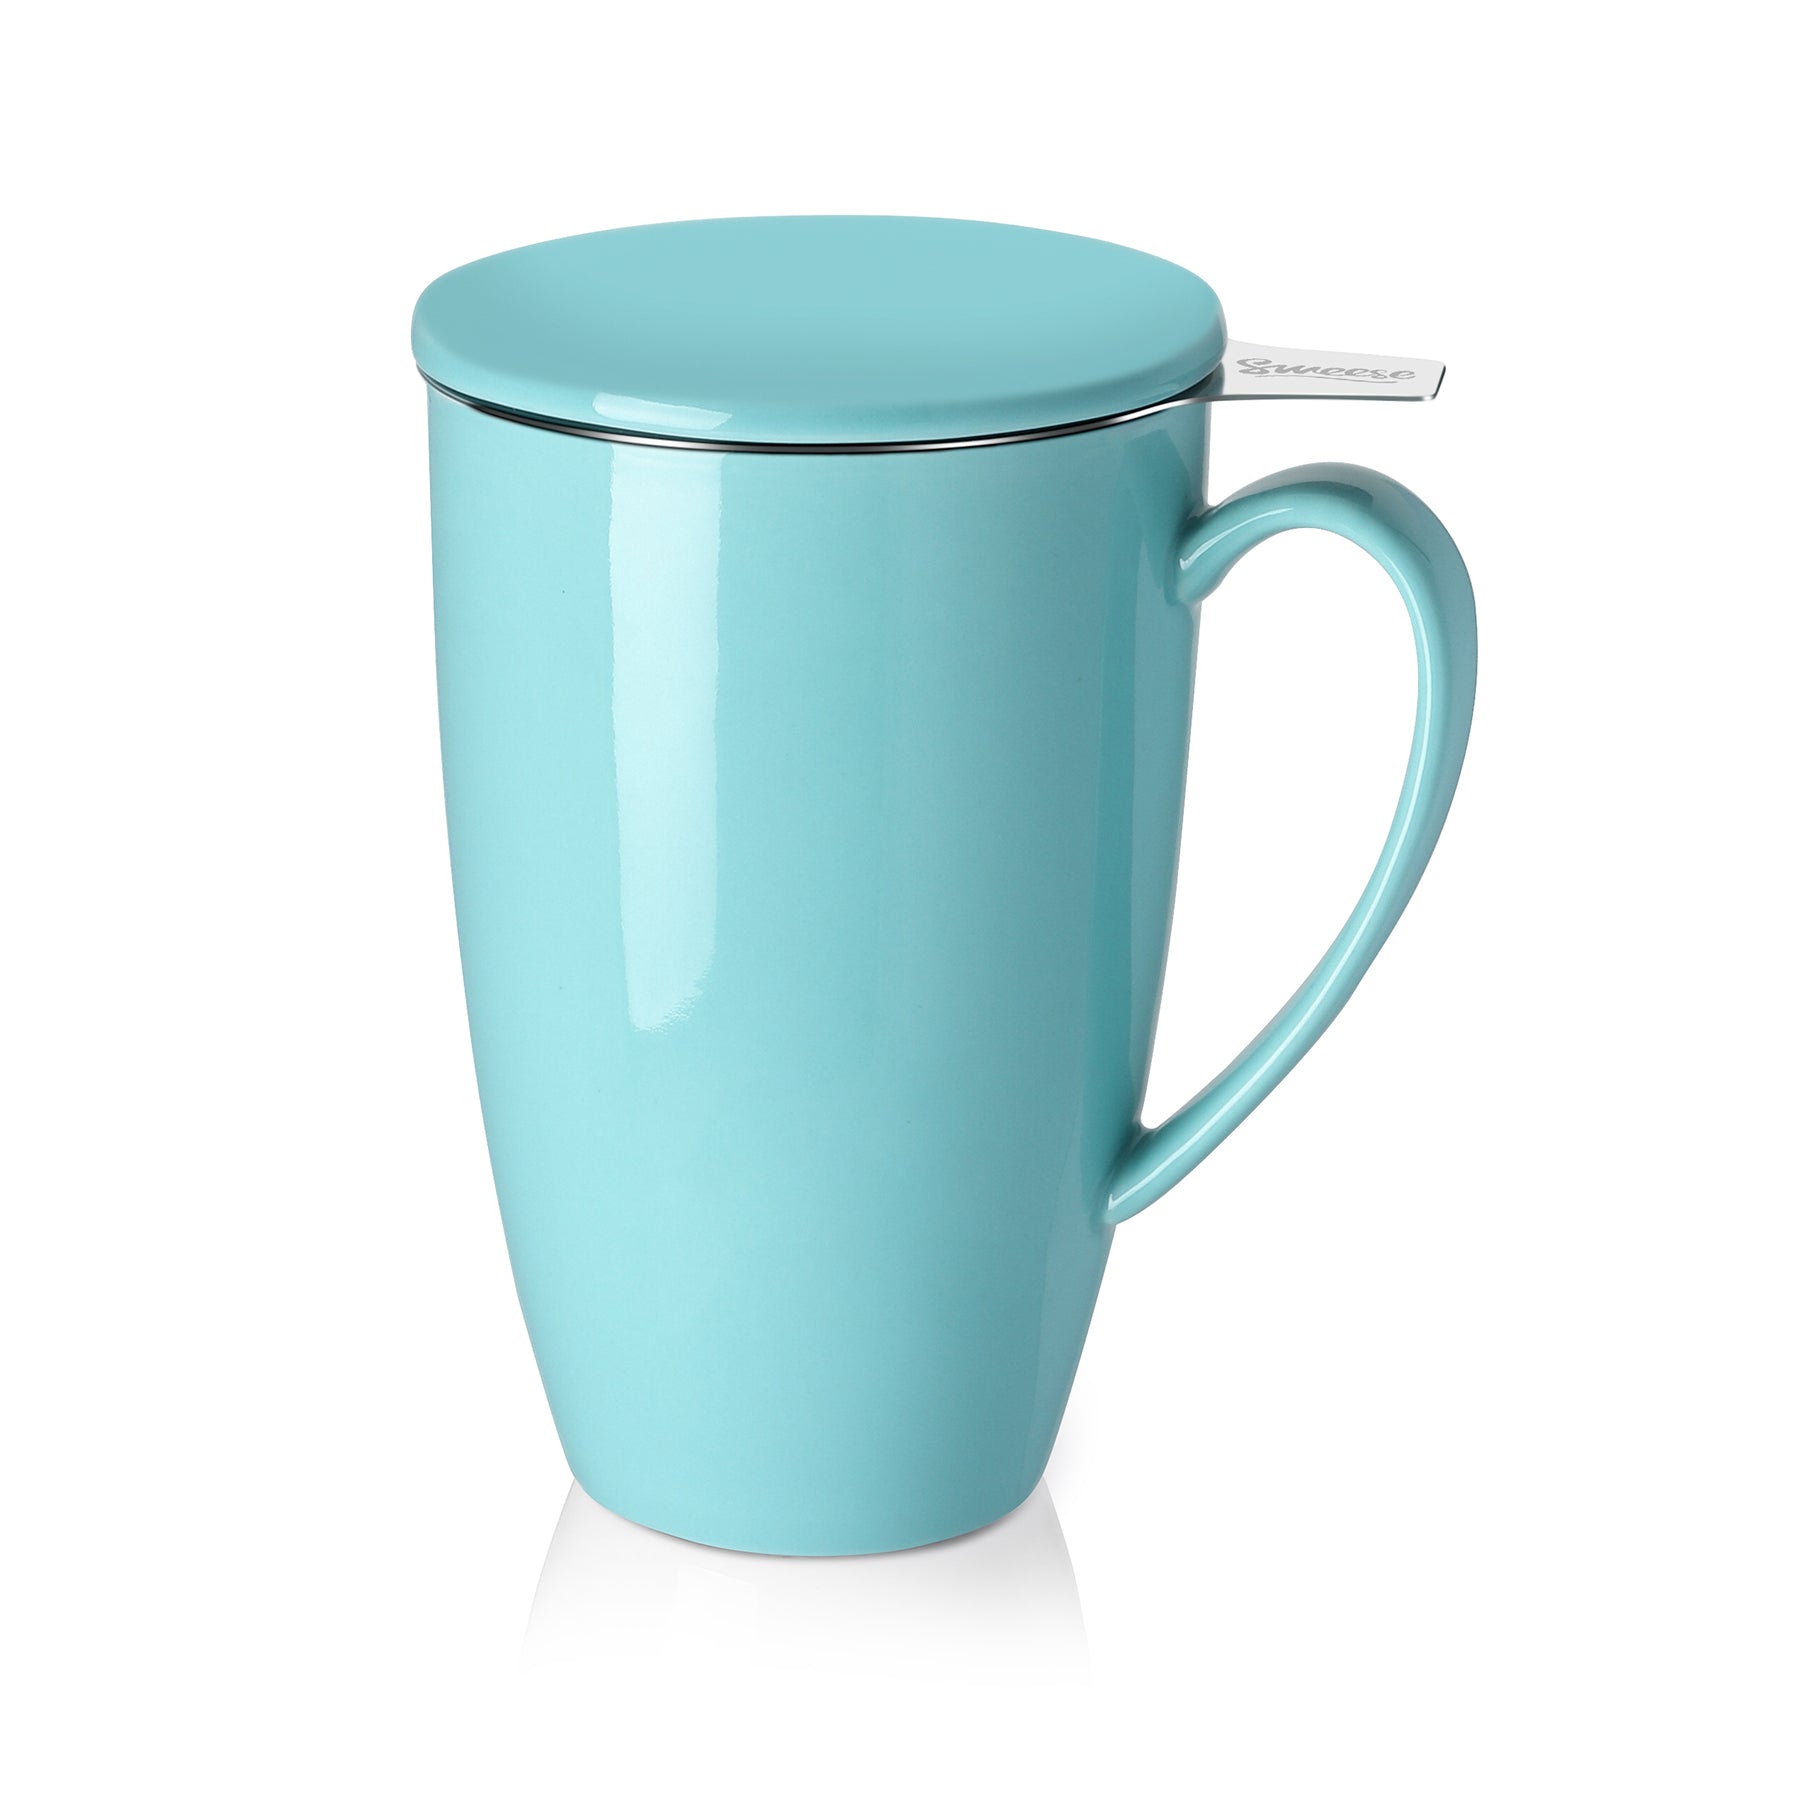 FORLIFE Curve Tall Tea Mug with Infuser and Lid, 15-ounce, Blue